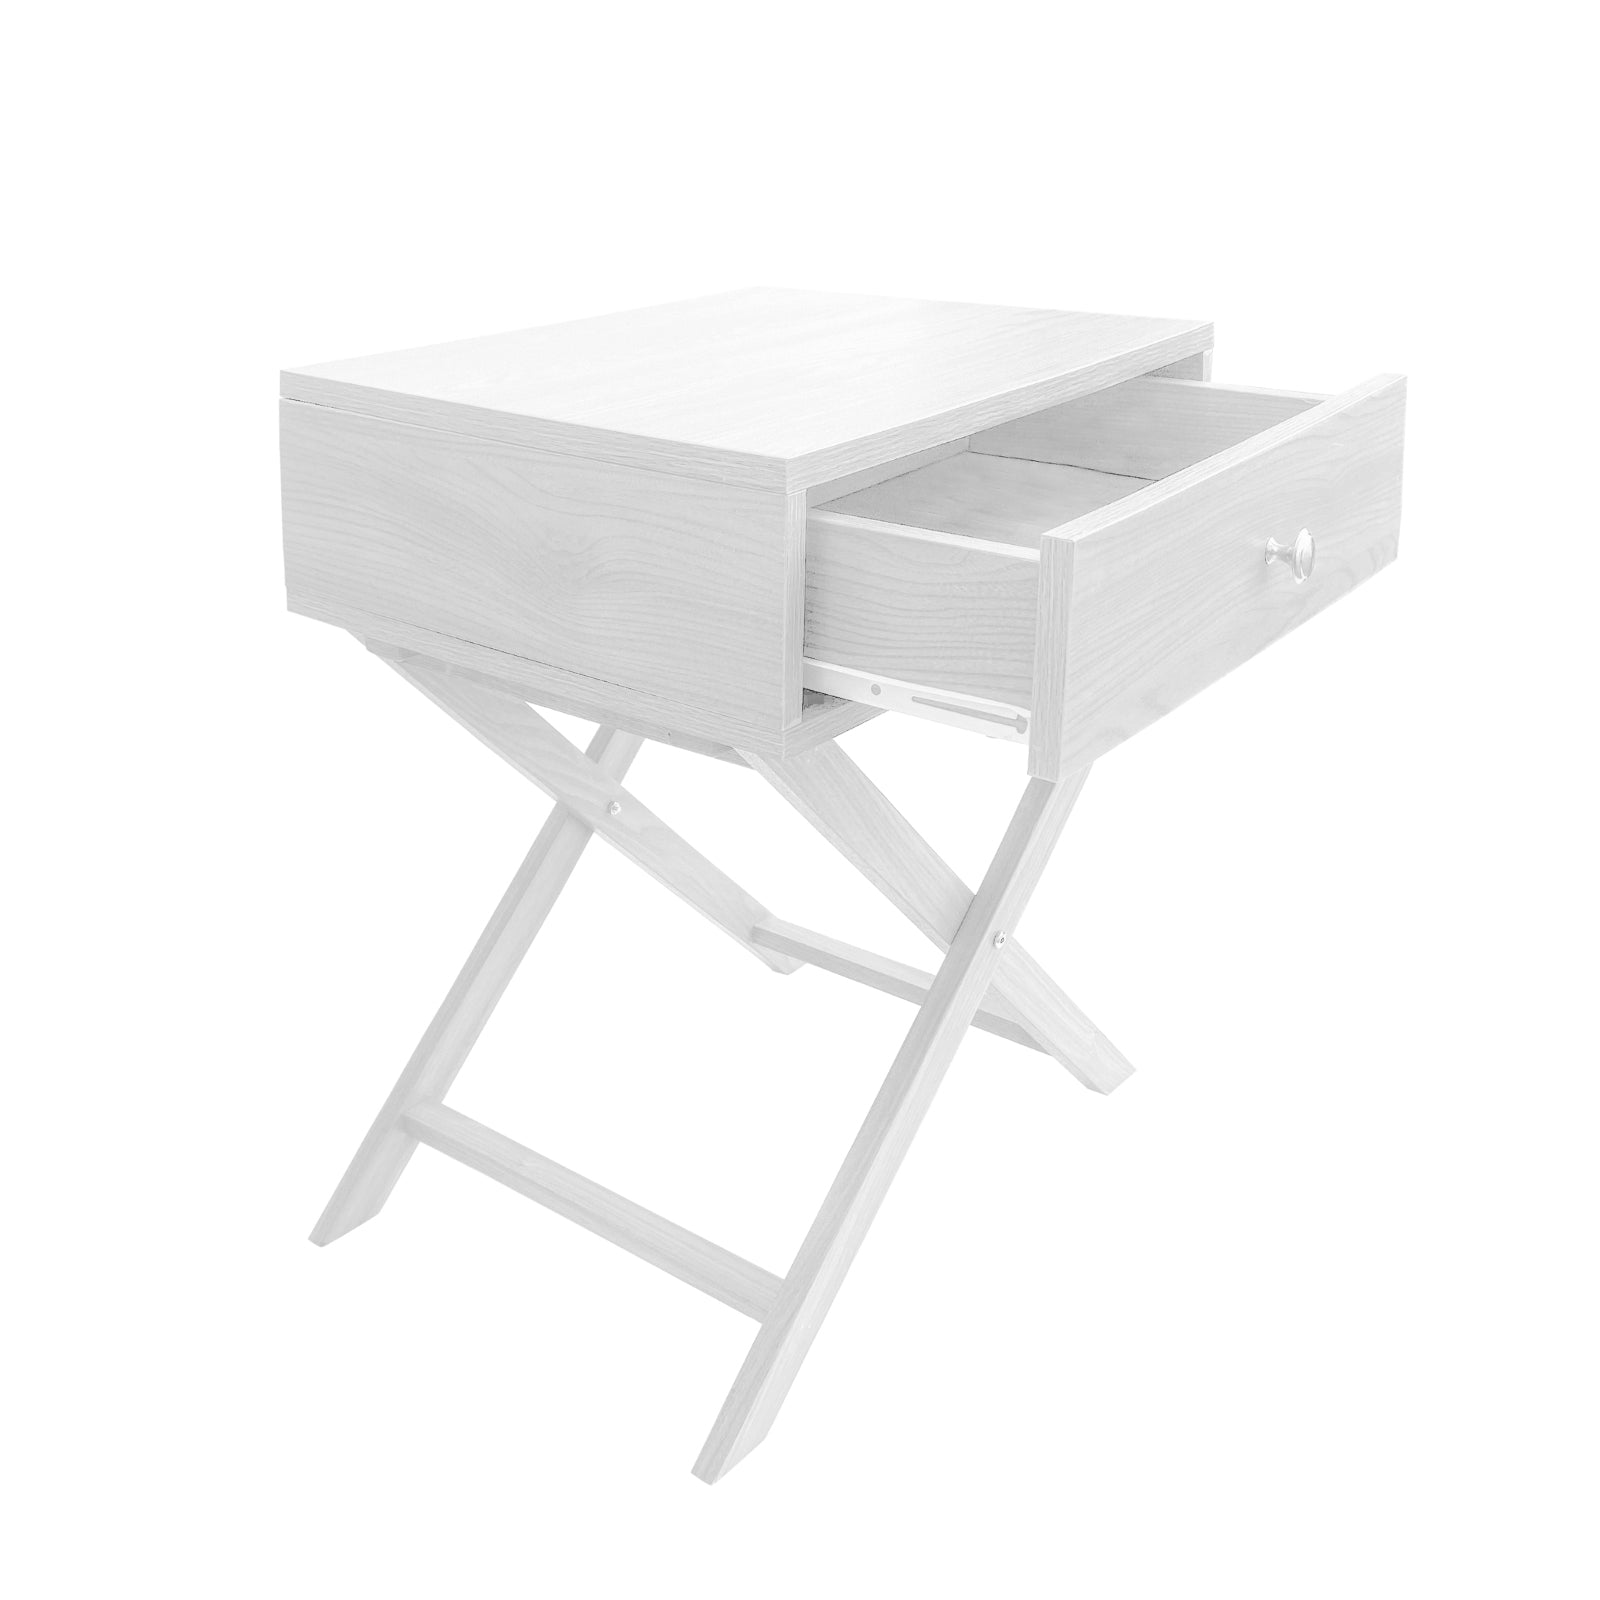 Milano Decor Bedside Table Surry Hills White Storage Cabinet Bedroom - One Pack - White